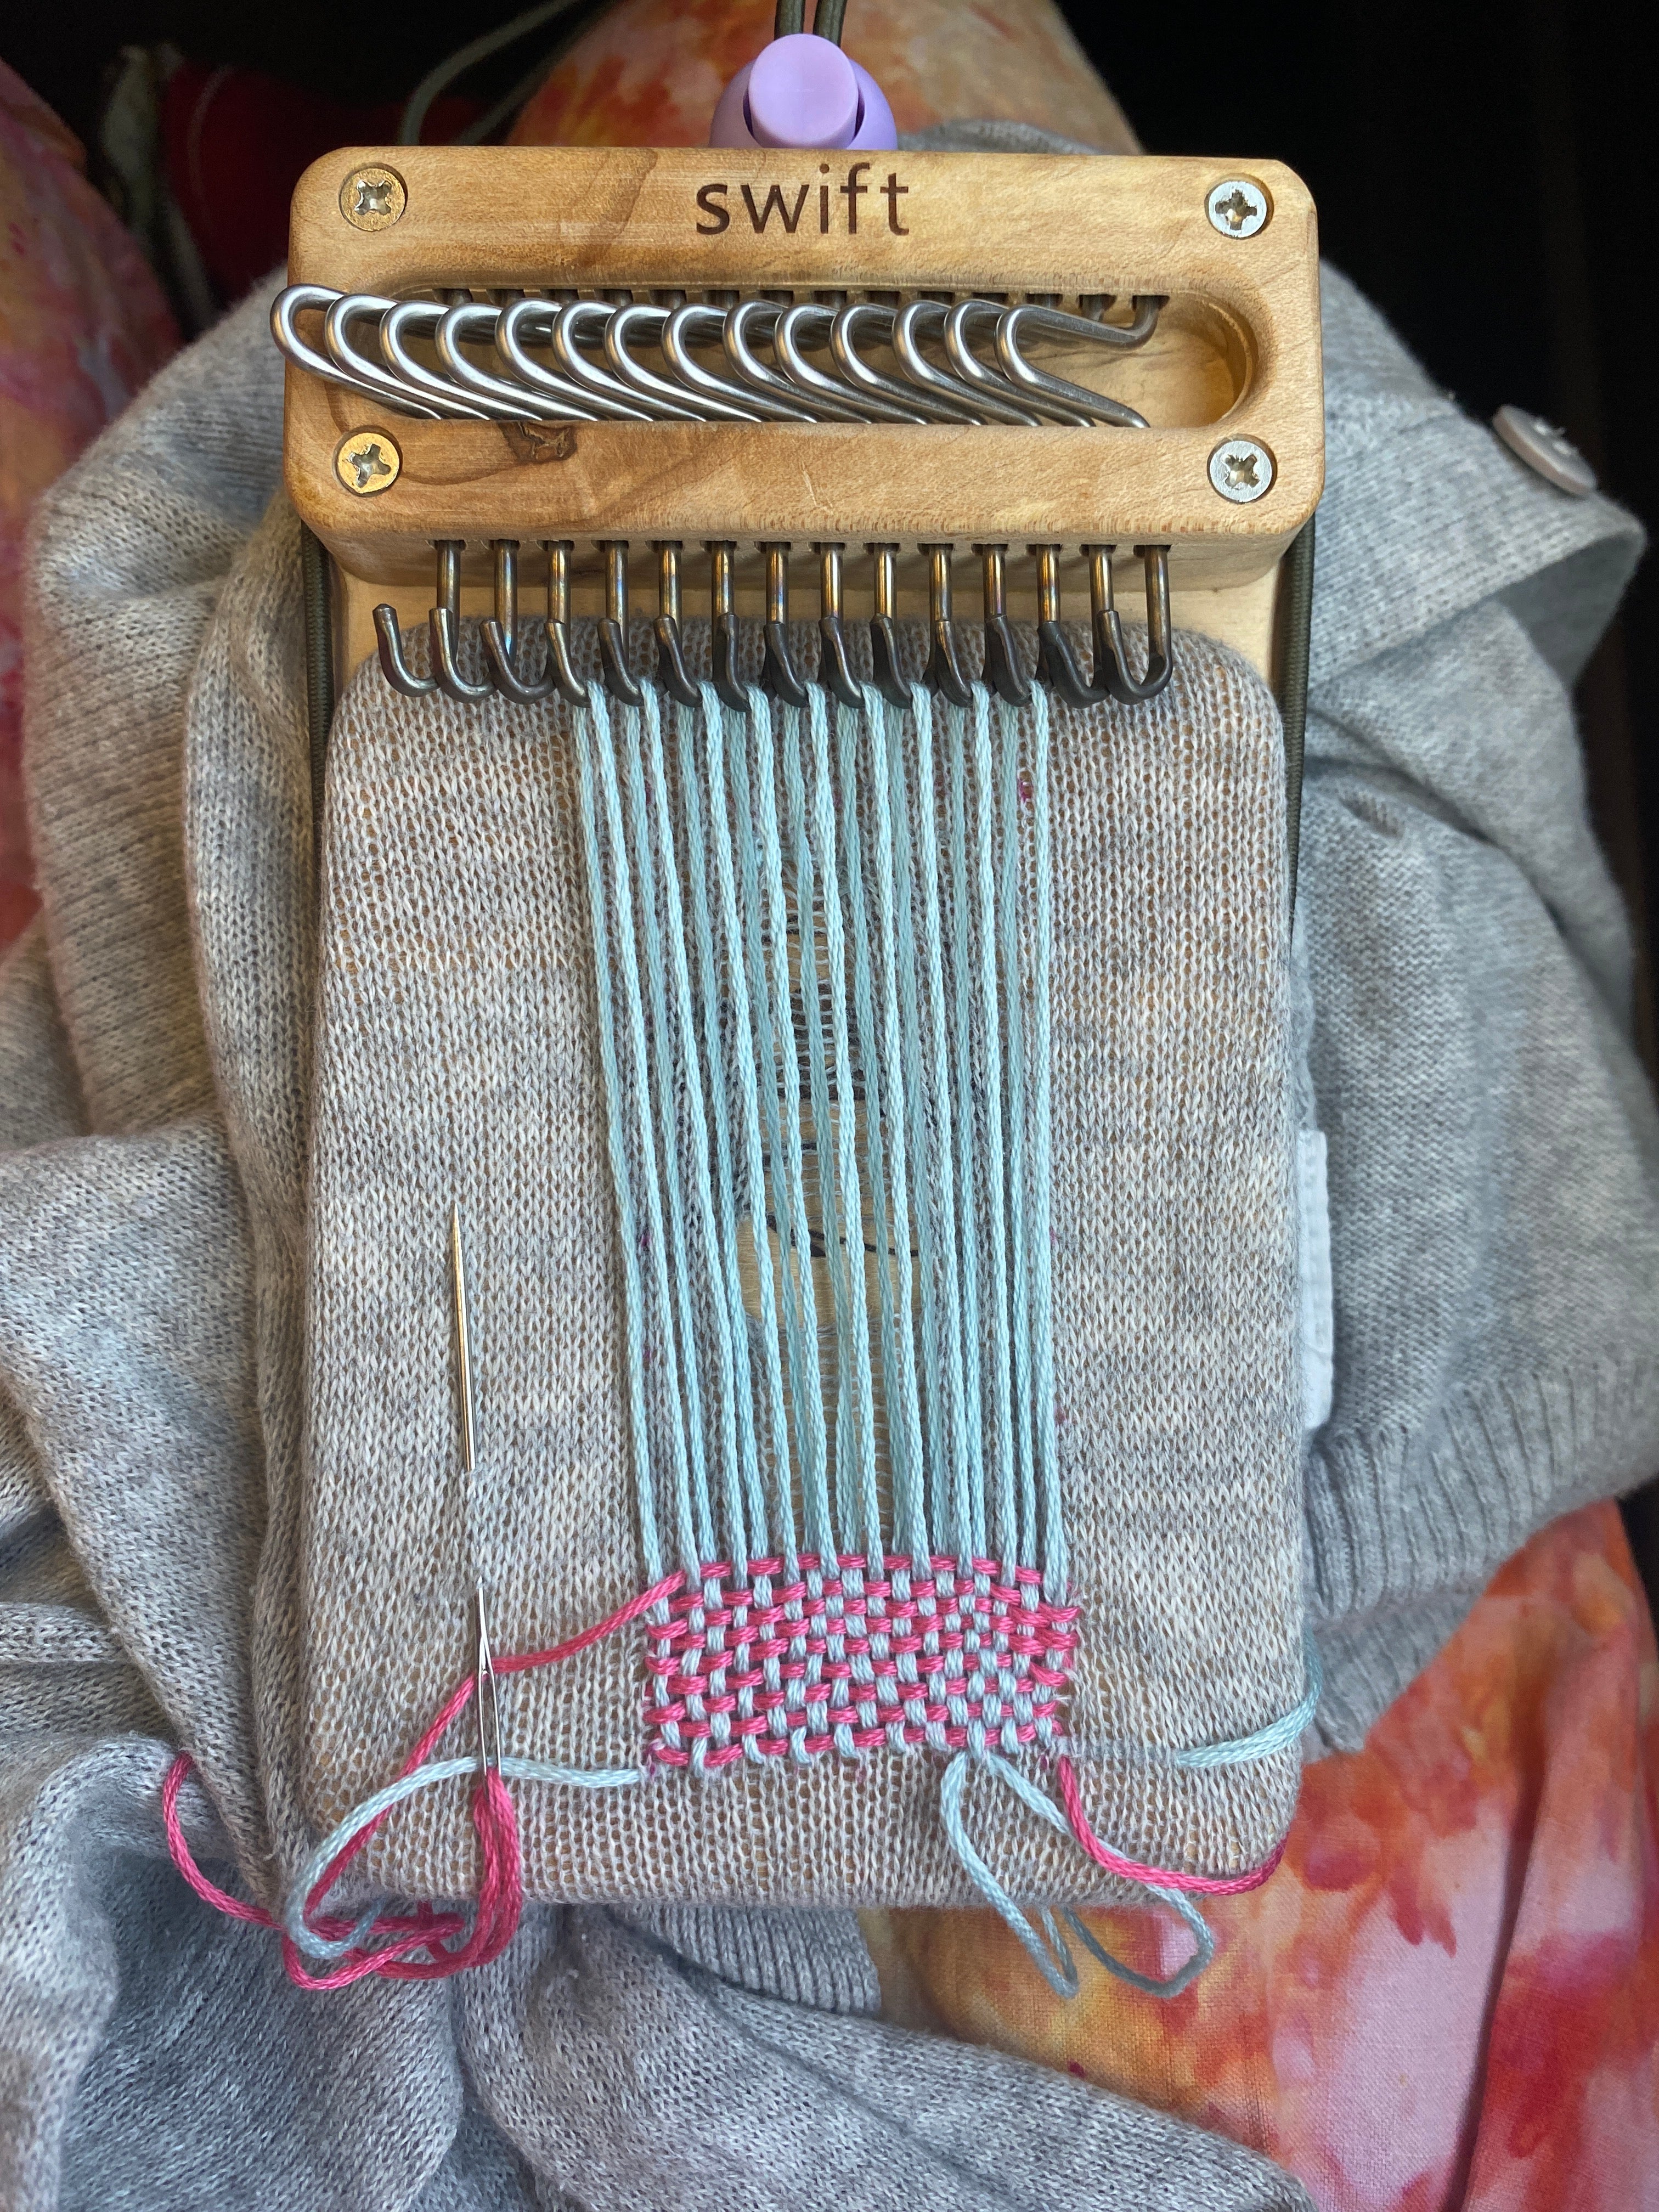 Swift Darning Loom in-progress visible mending with blue and grey thread on a grey sweater